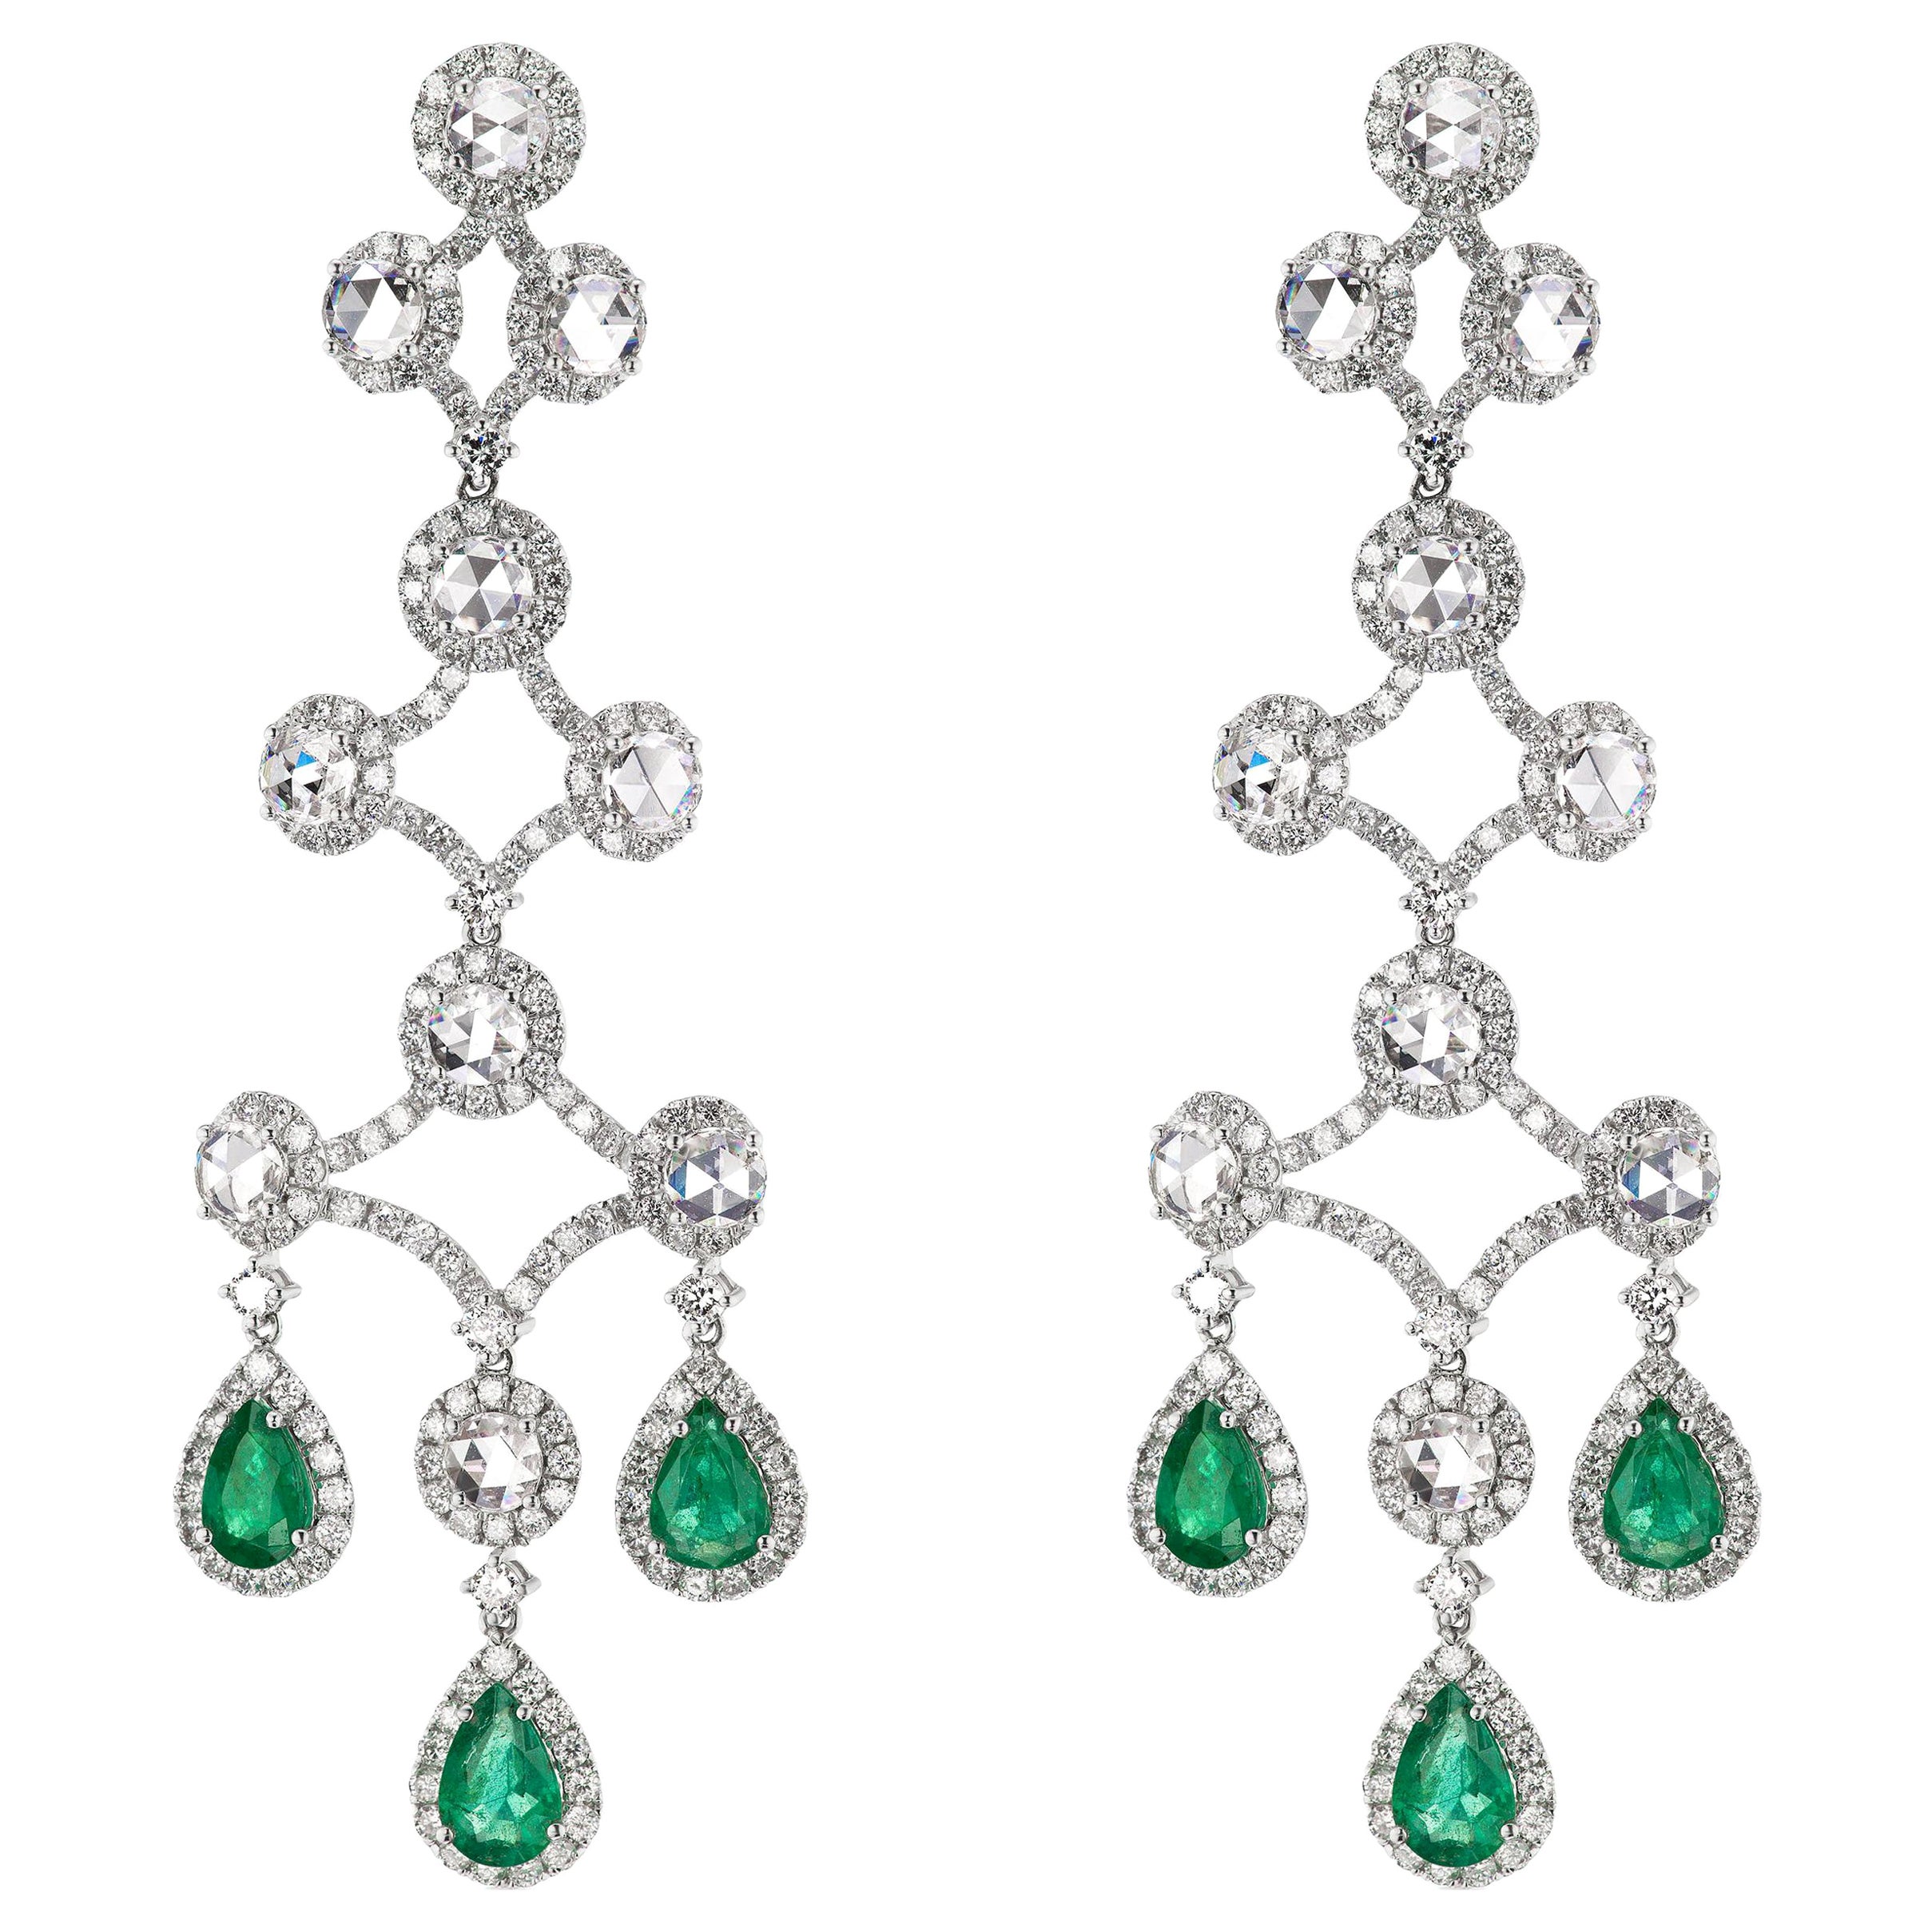 Nigaam 12.2 Cts. Emerald and Diamond Chandelier Earrings in 18K White Gold